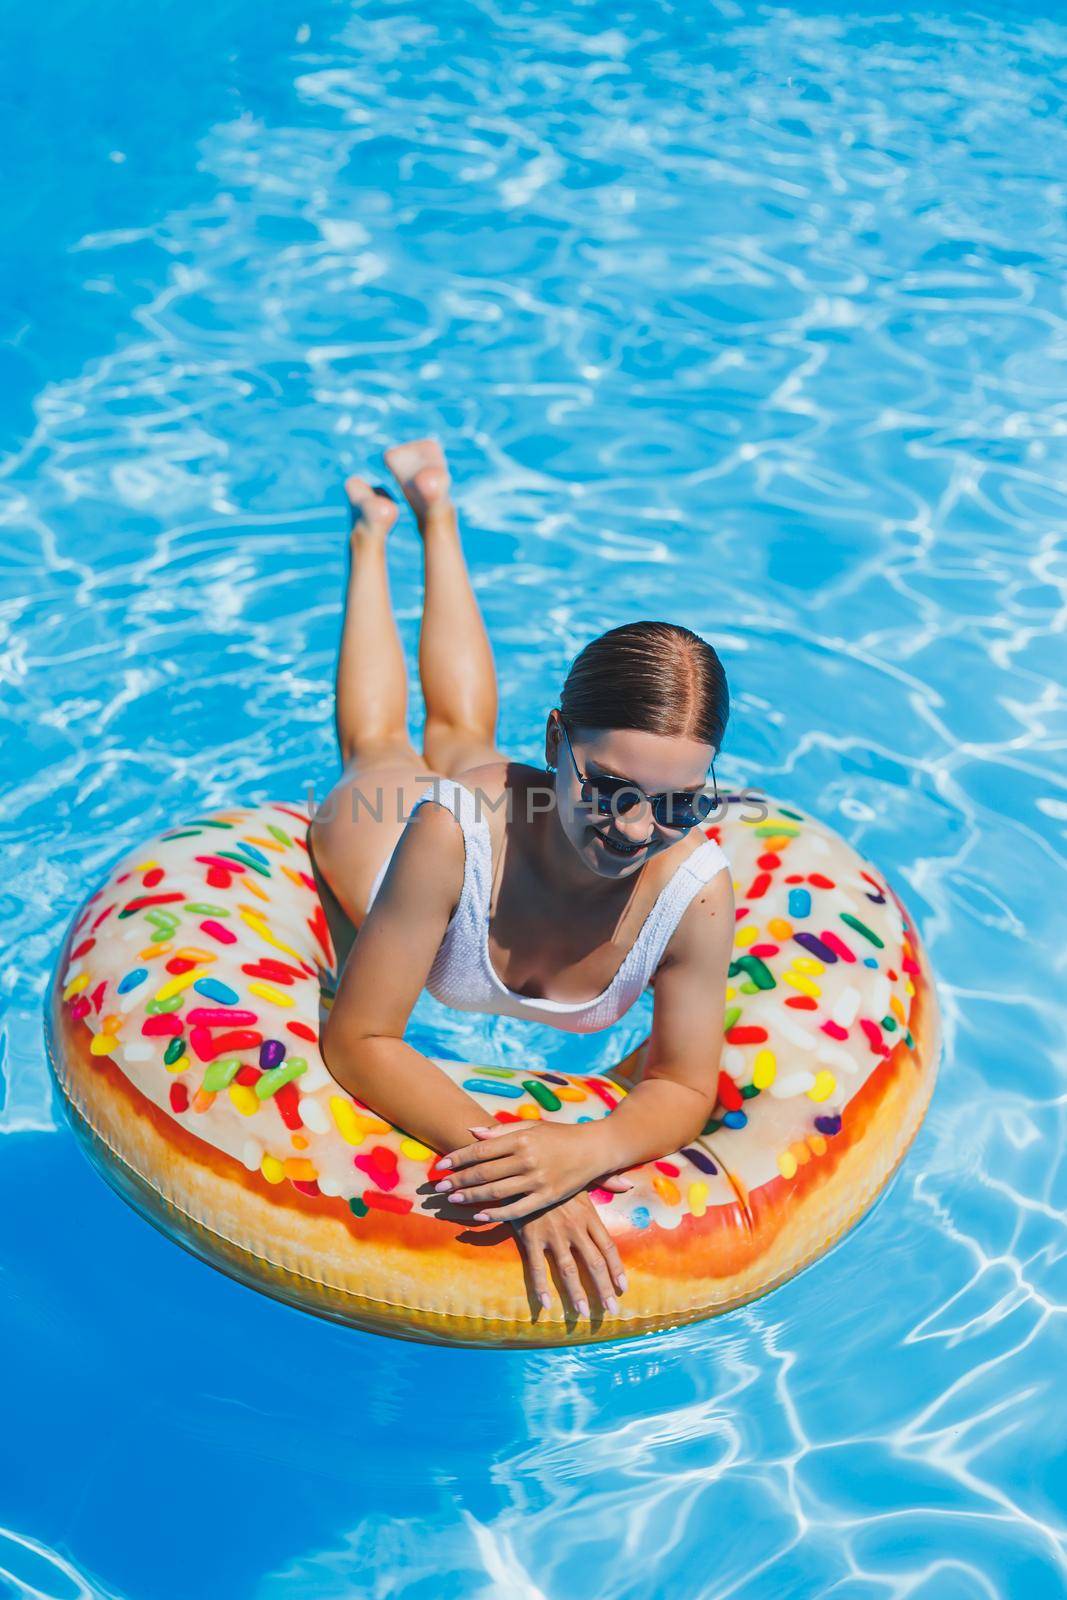 Rest in the pool. Happy young woman in swimsuit, sunglasses and inflatable rubber ring floating in blue water. Summer luxury holidays in the spa resort pool